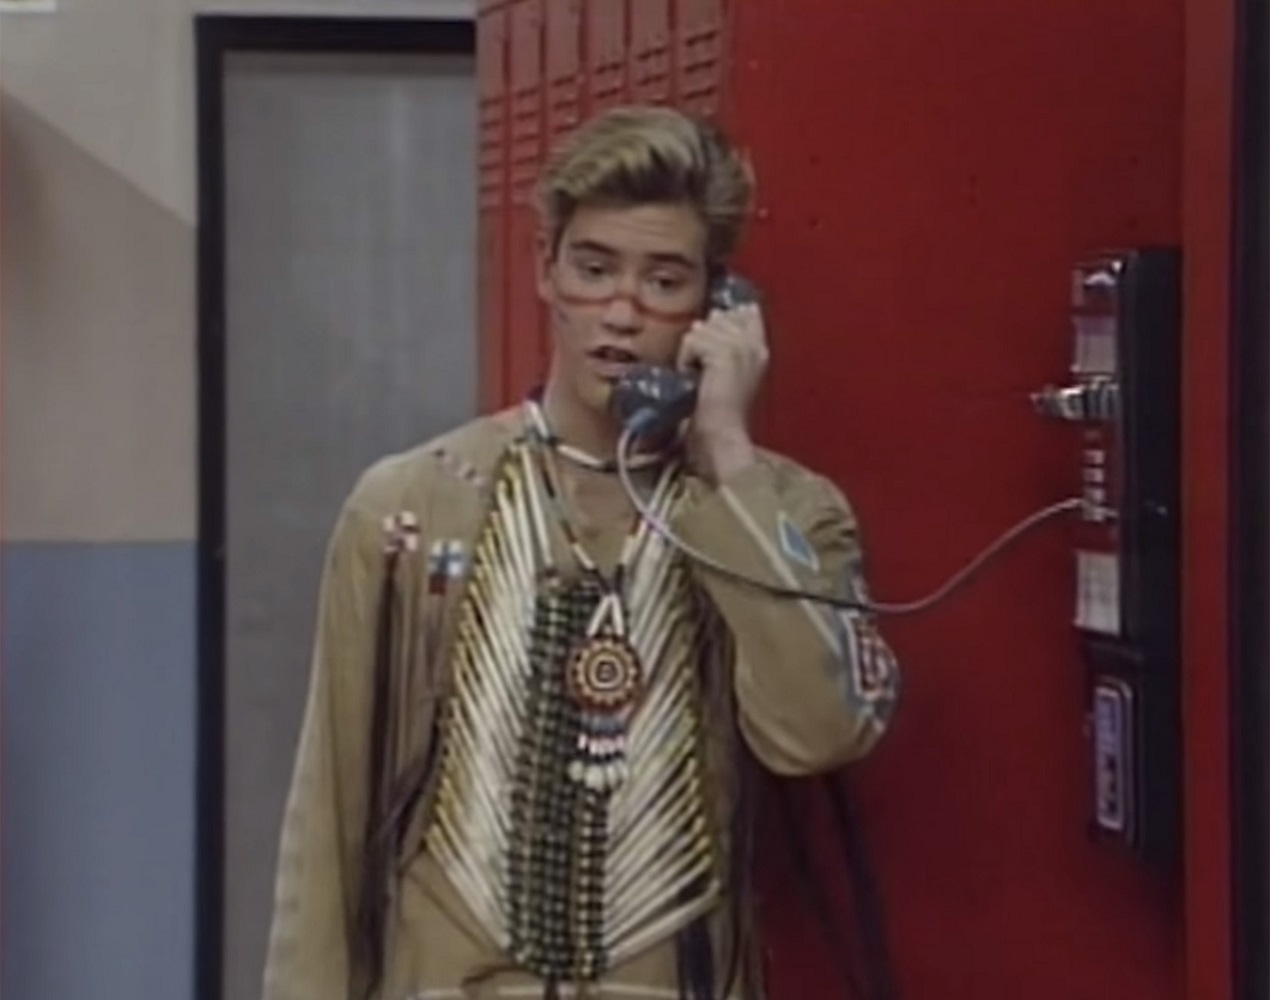 zach using a payphone while dressed up in the native american clothing